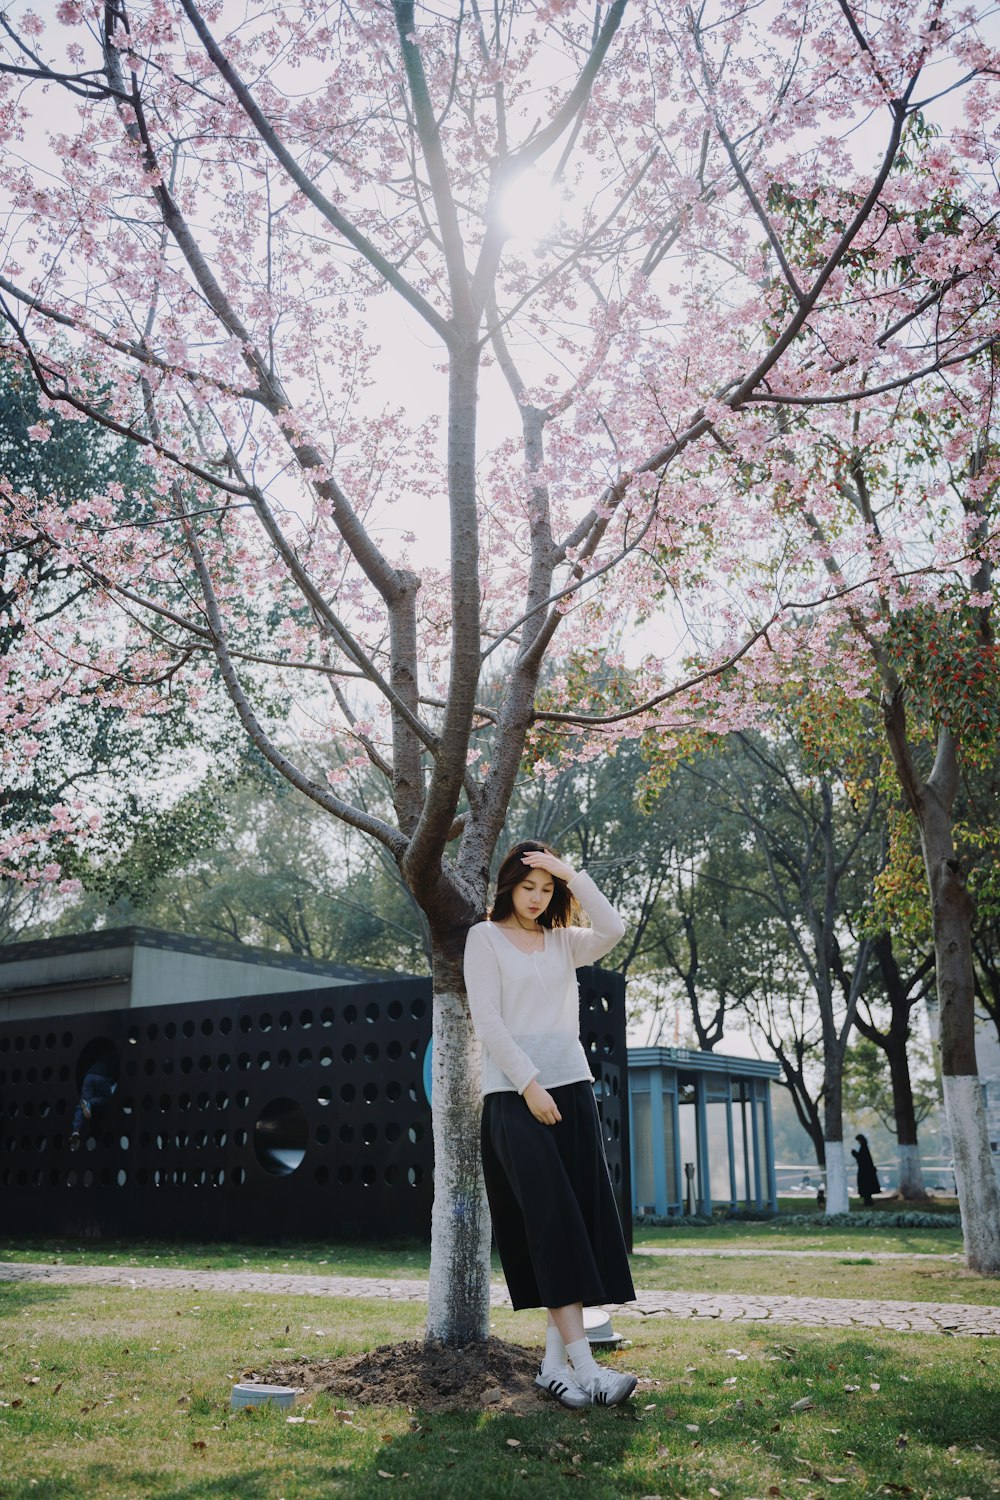 a woman standing next to a tree with pink flowers